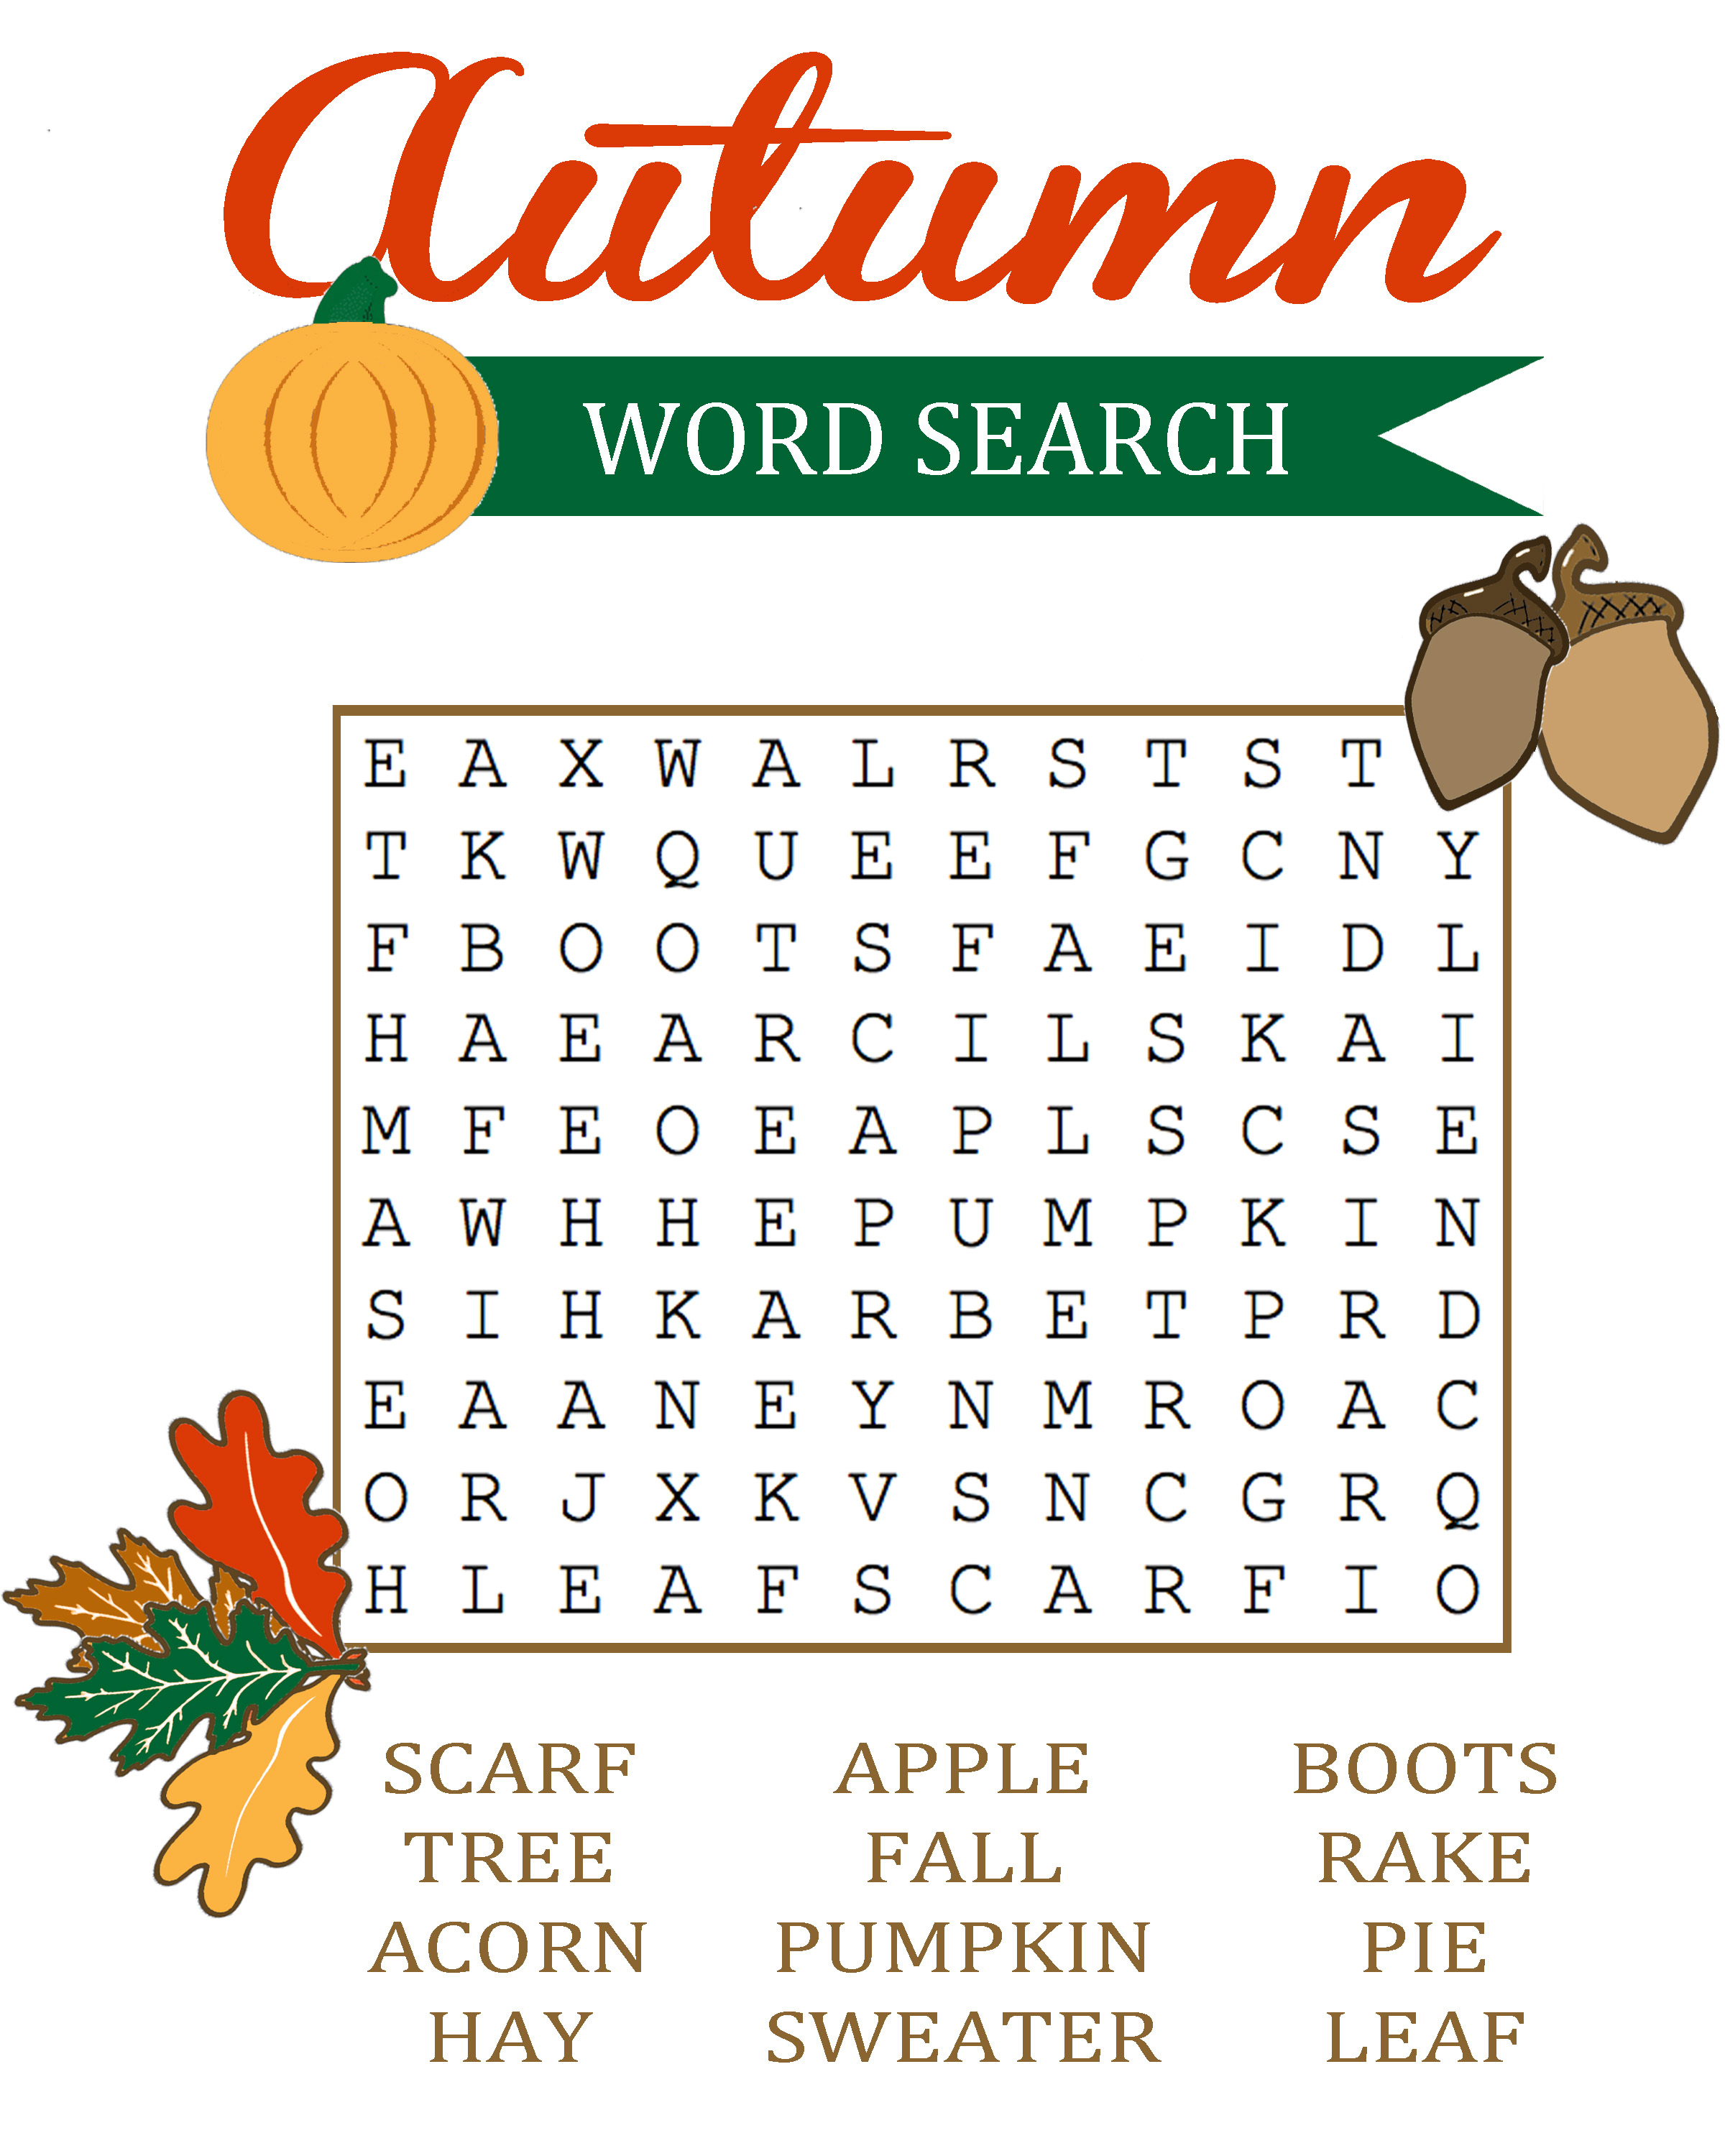 18 Fun Fall Word Search Puzzles | Kittybabylove - Printable Autumn Puzzles